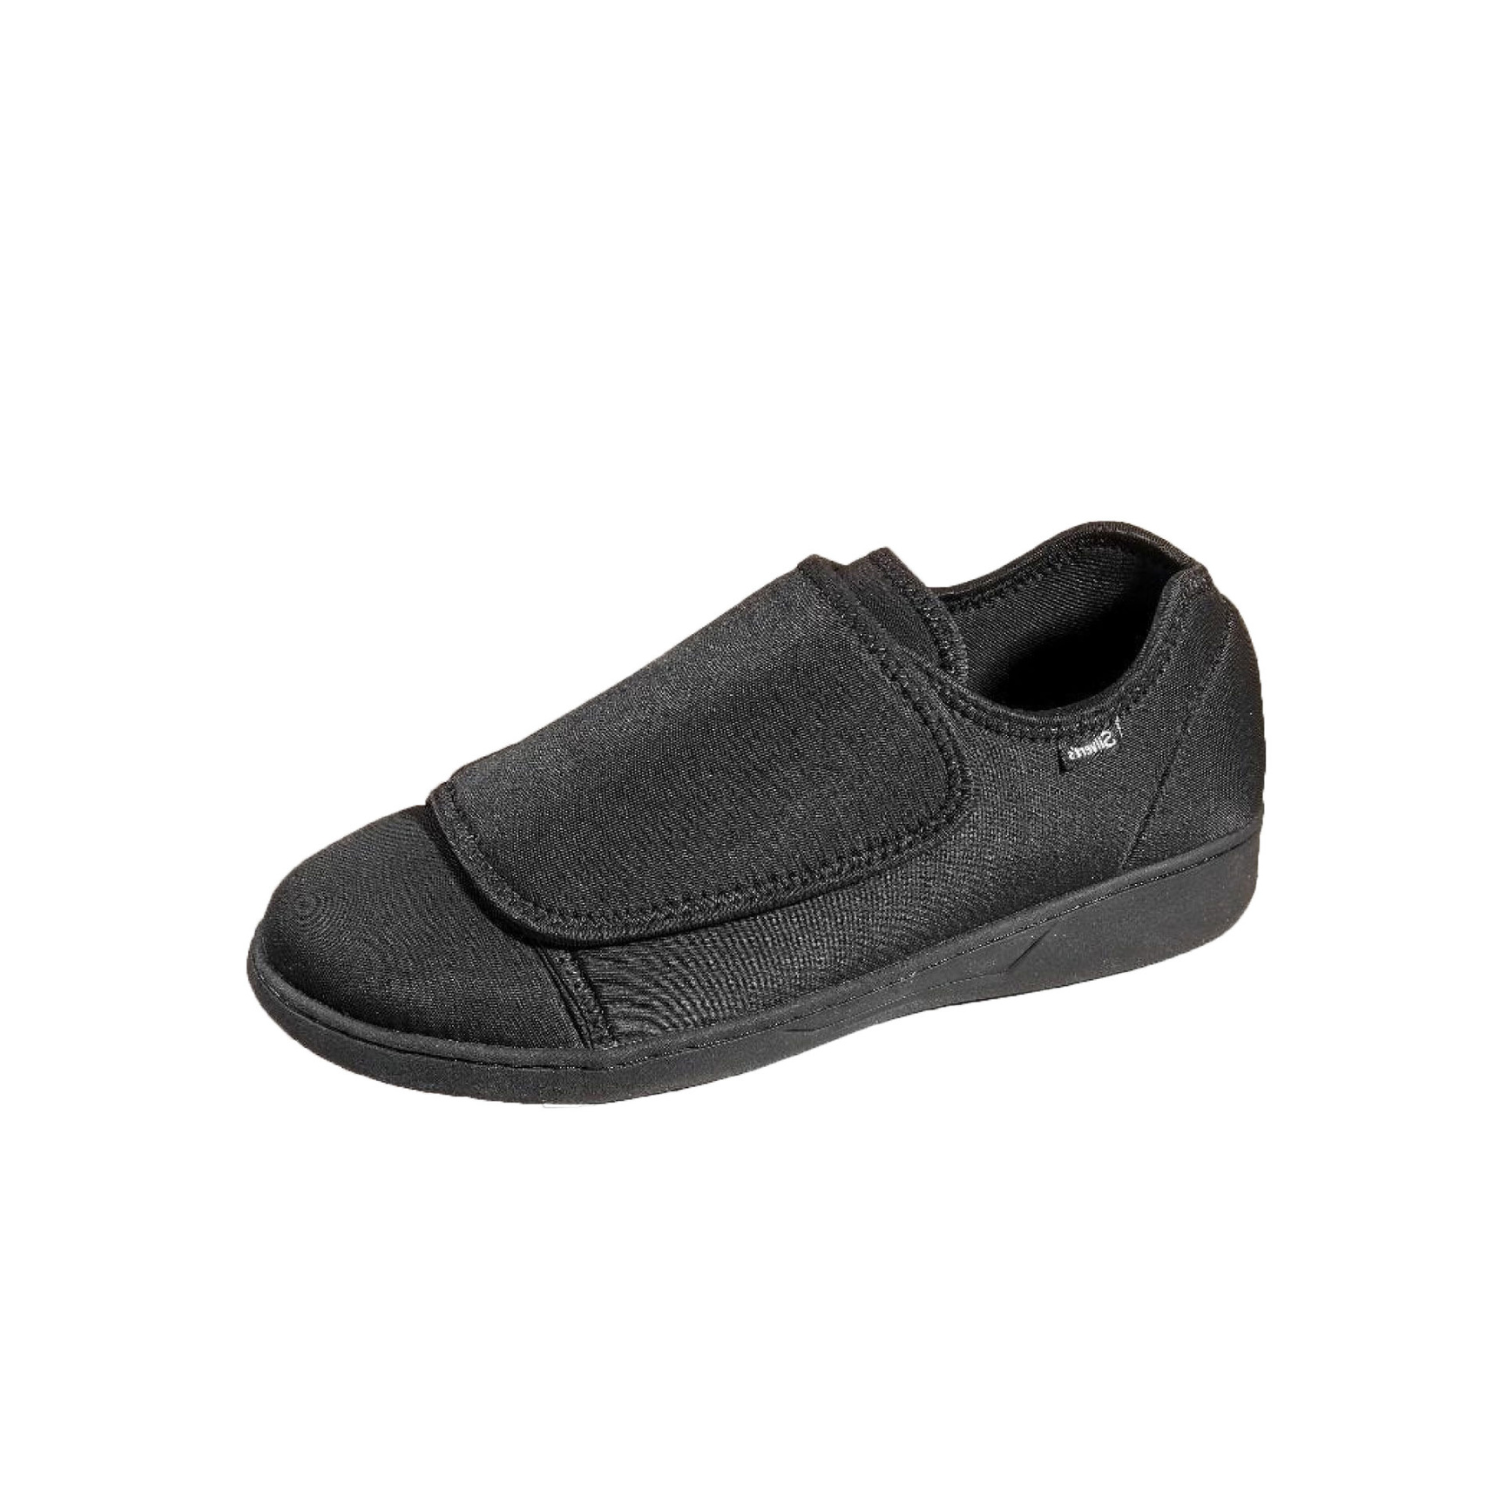 Men's Extra Wide Comfort Step Shoes - Easy Touch - Swollen Feet - Black